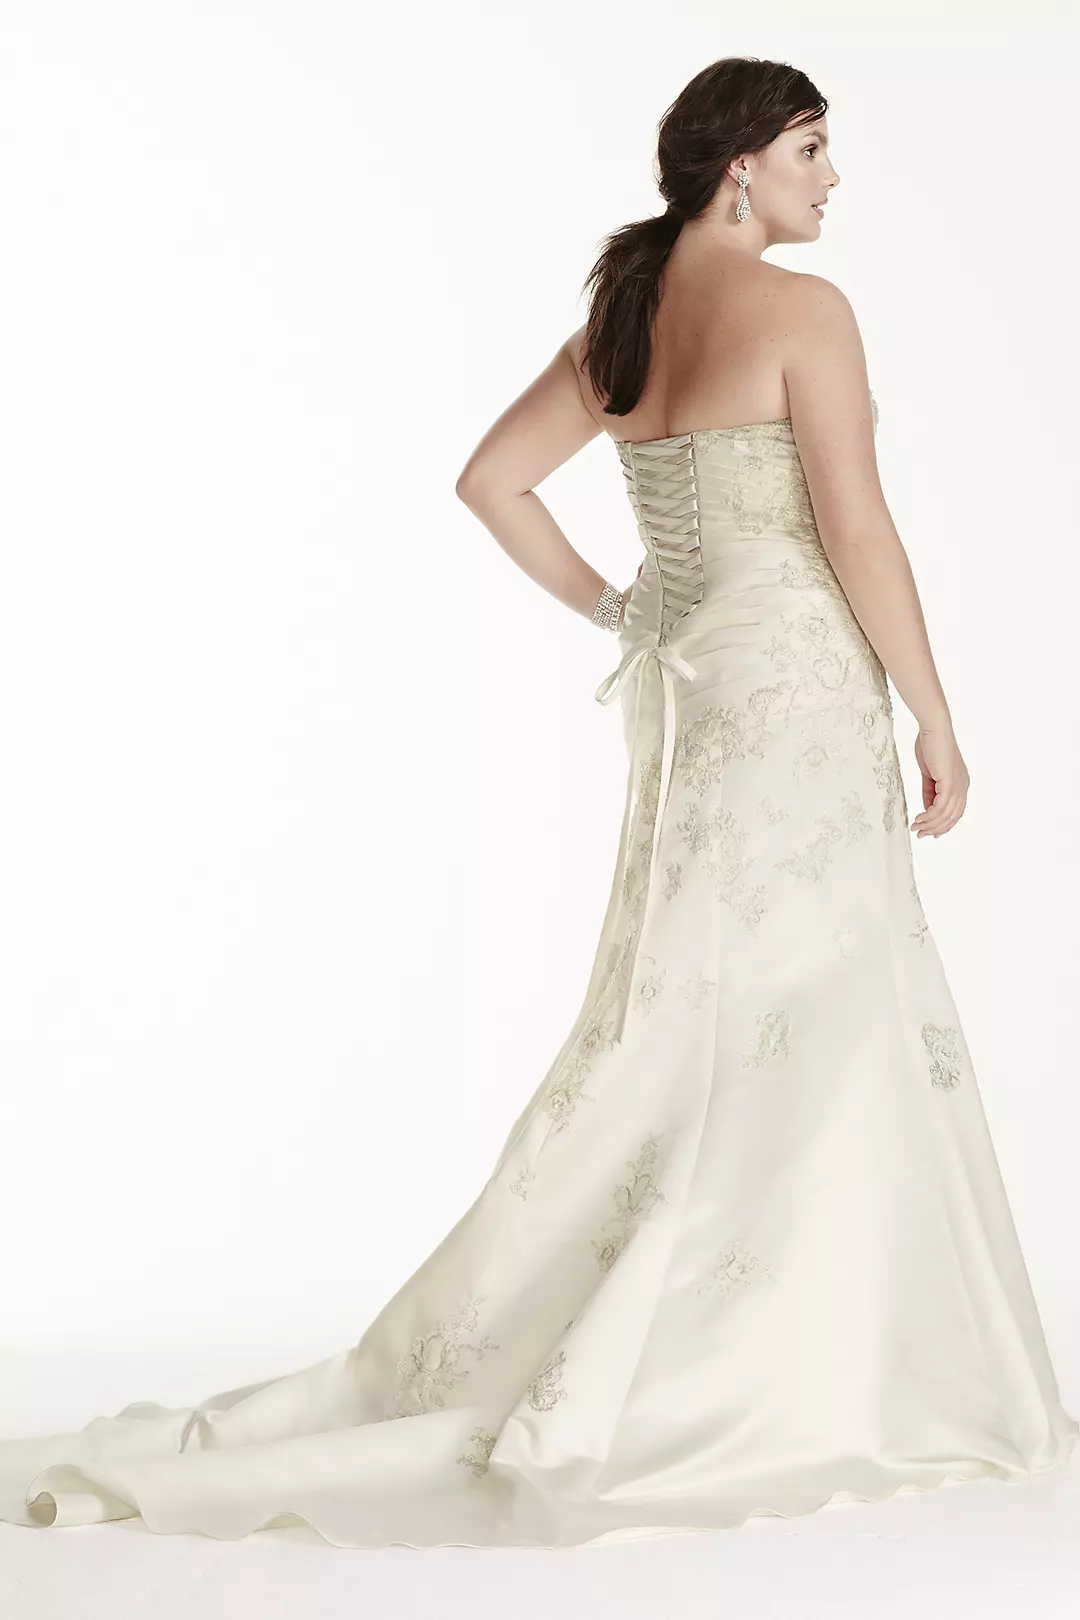 As-Is Plus Size Wedding Dress with Lace Applique Image 2